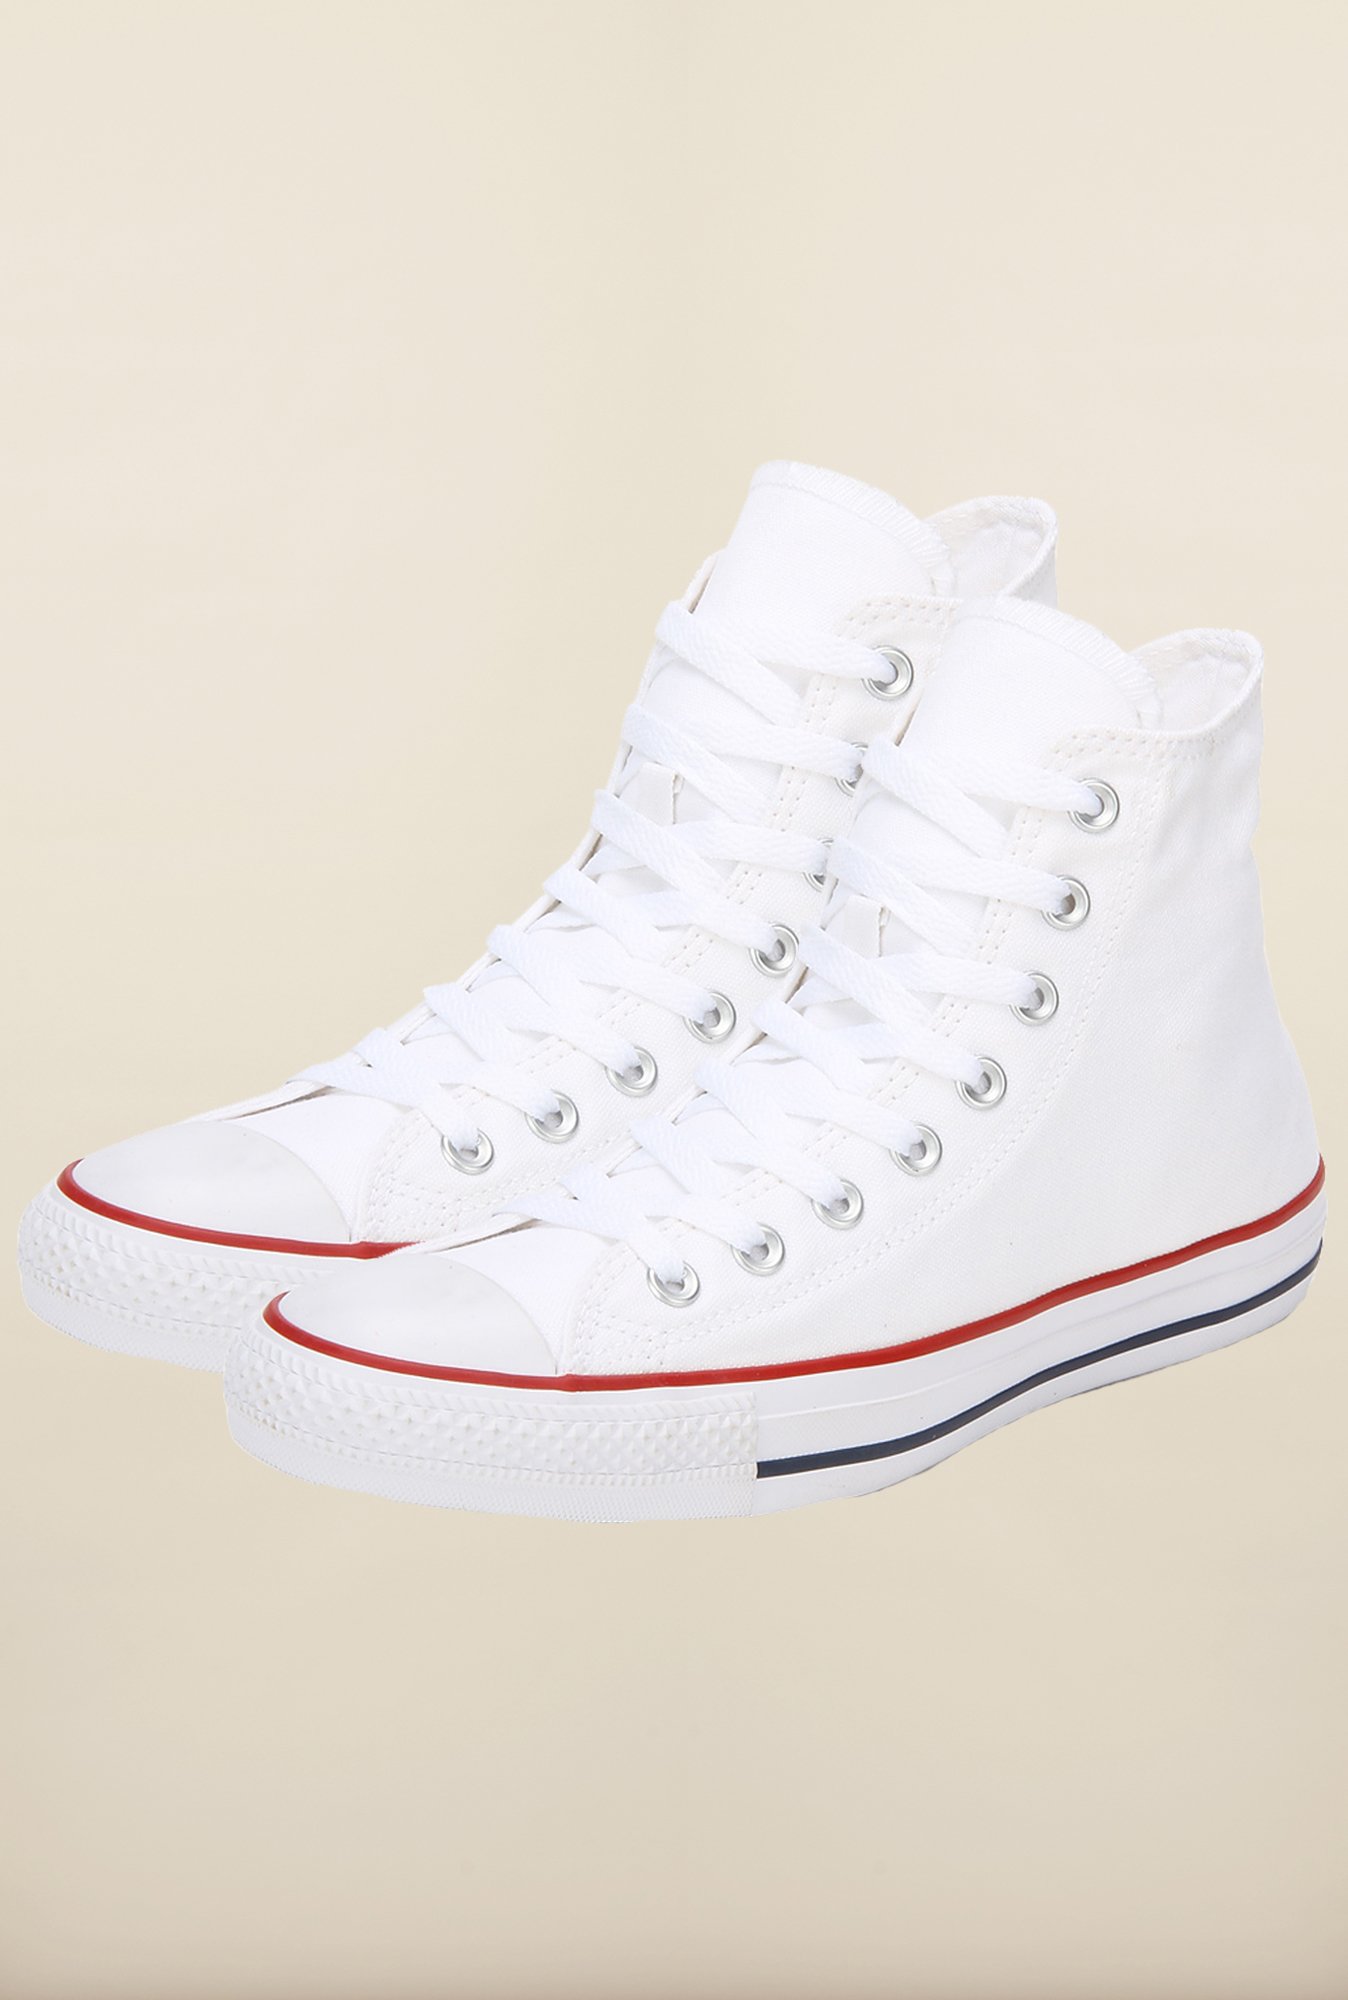 Buy Converse Optical White Sneakers from top Brands at Best Prices Online  in India | Tata CLiQ